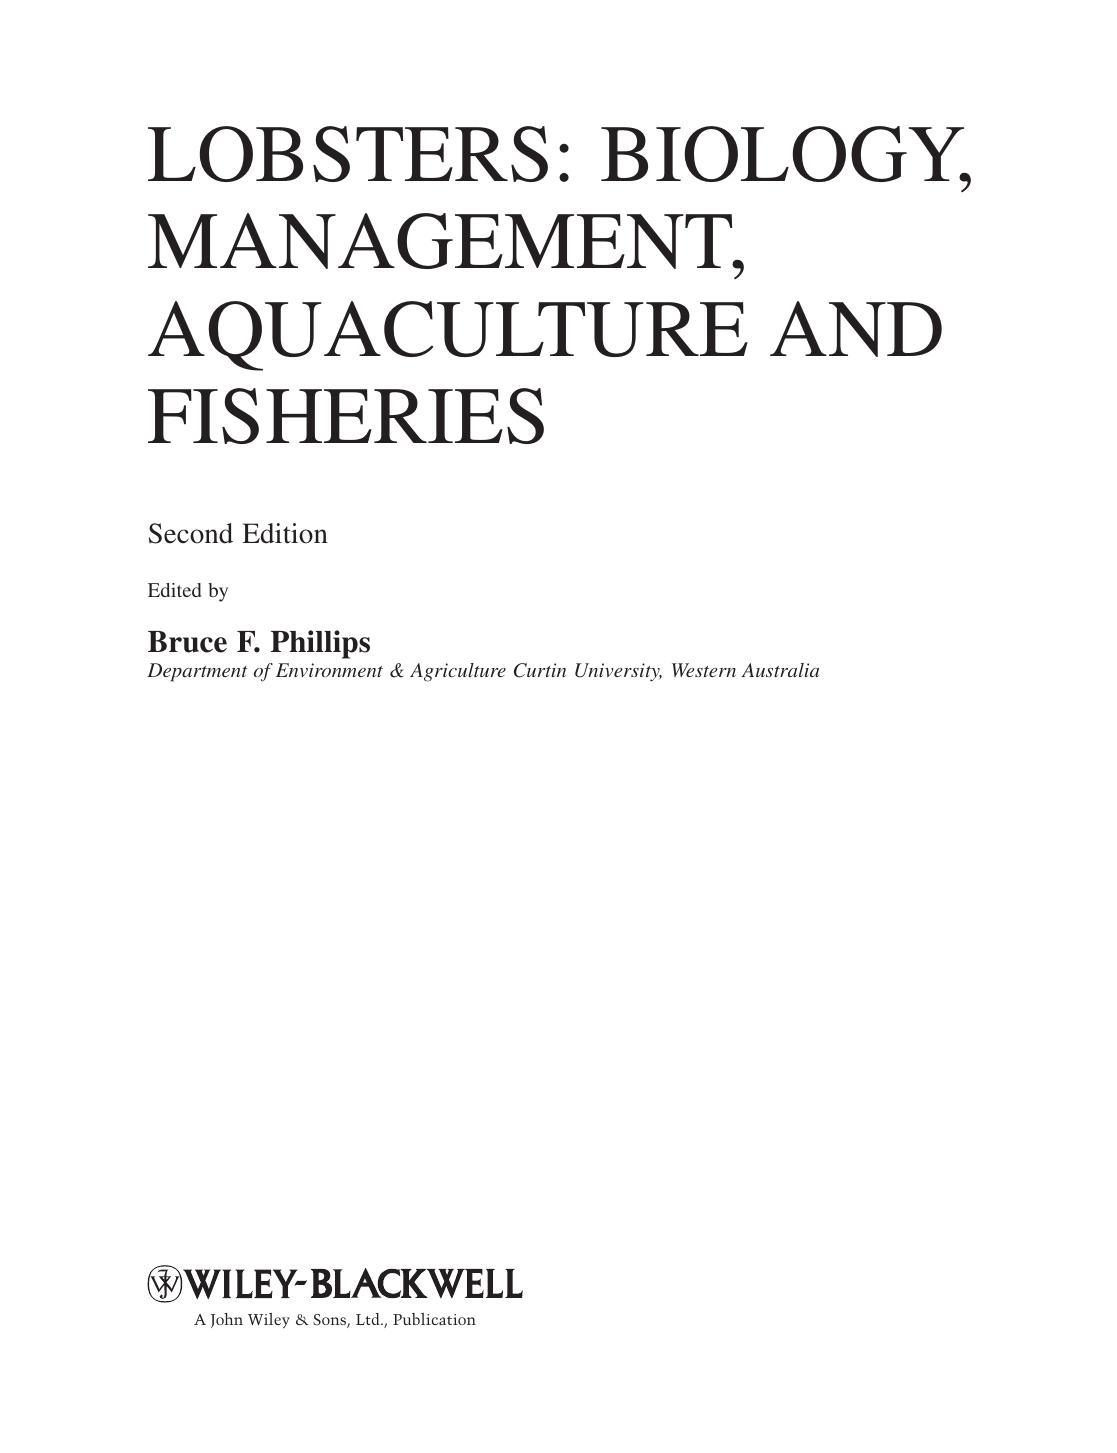 Lobsters  Biology, Management, Aquaculture and Fisheries, Second Edition-Wiley-Blackwell (2013)